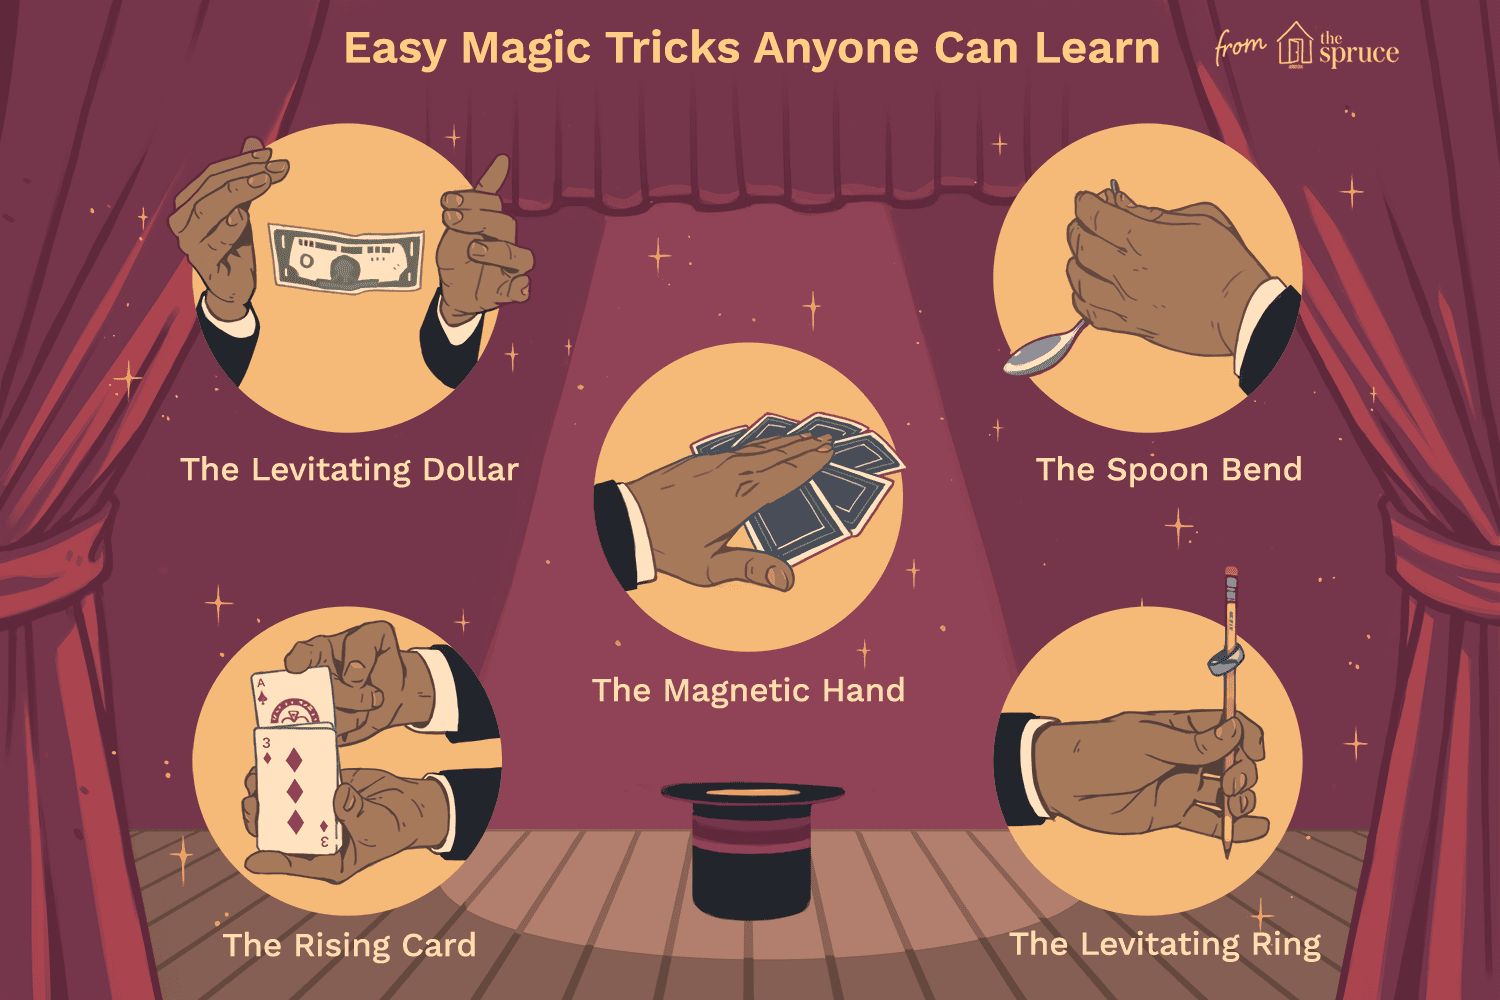 Illustration of different types of easy magic tricks